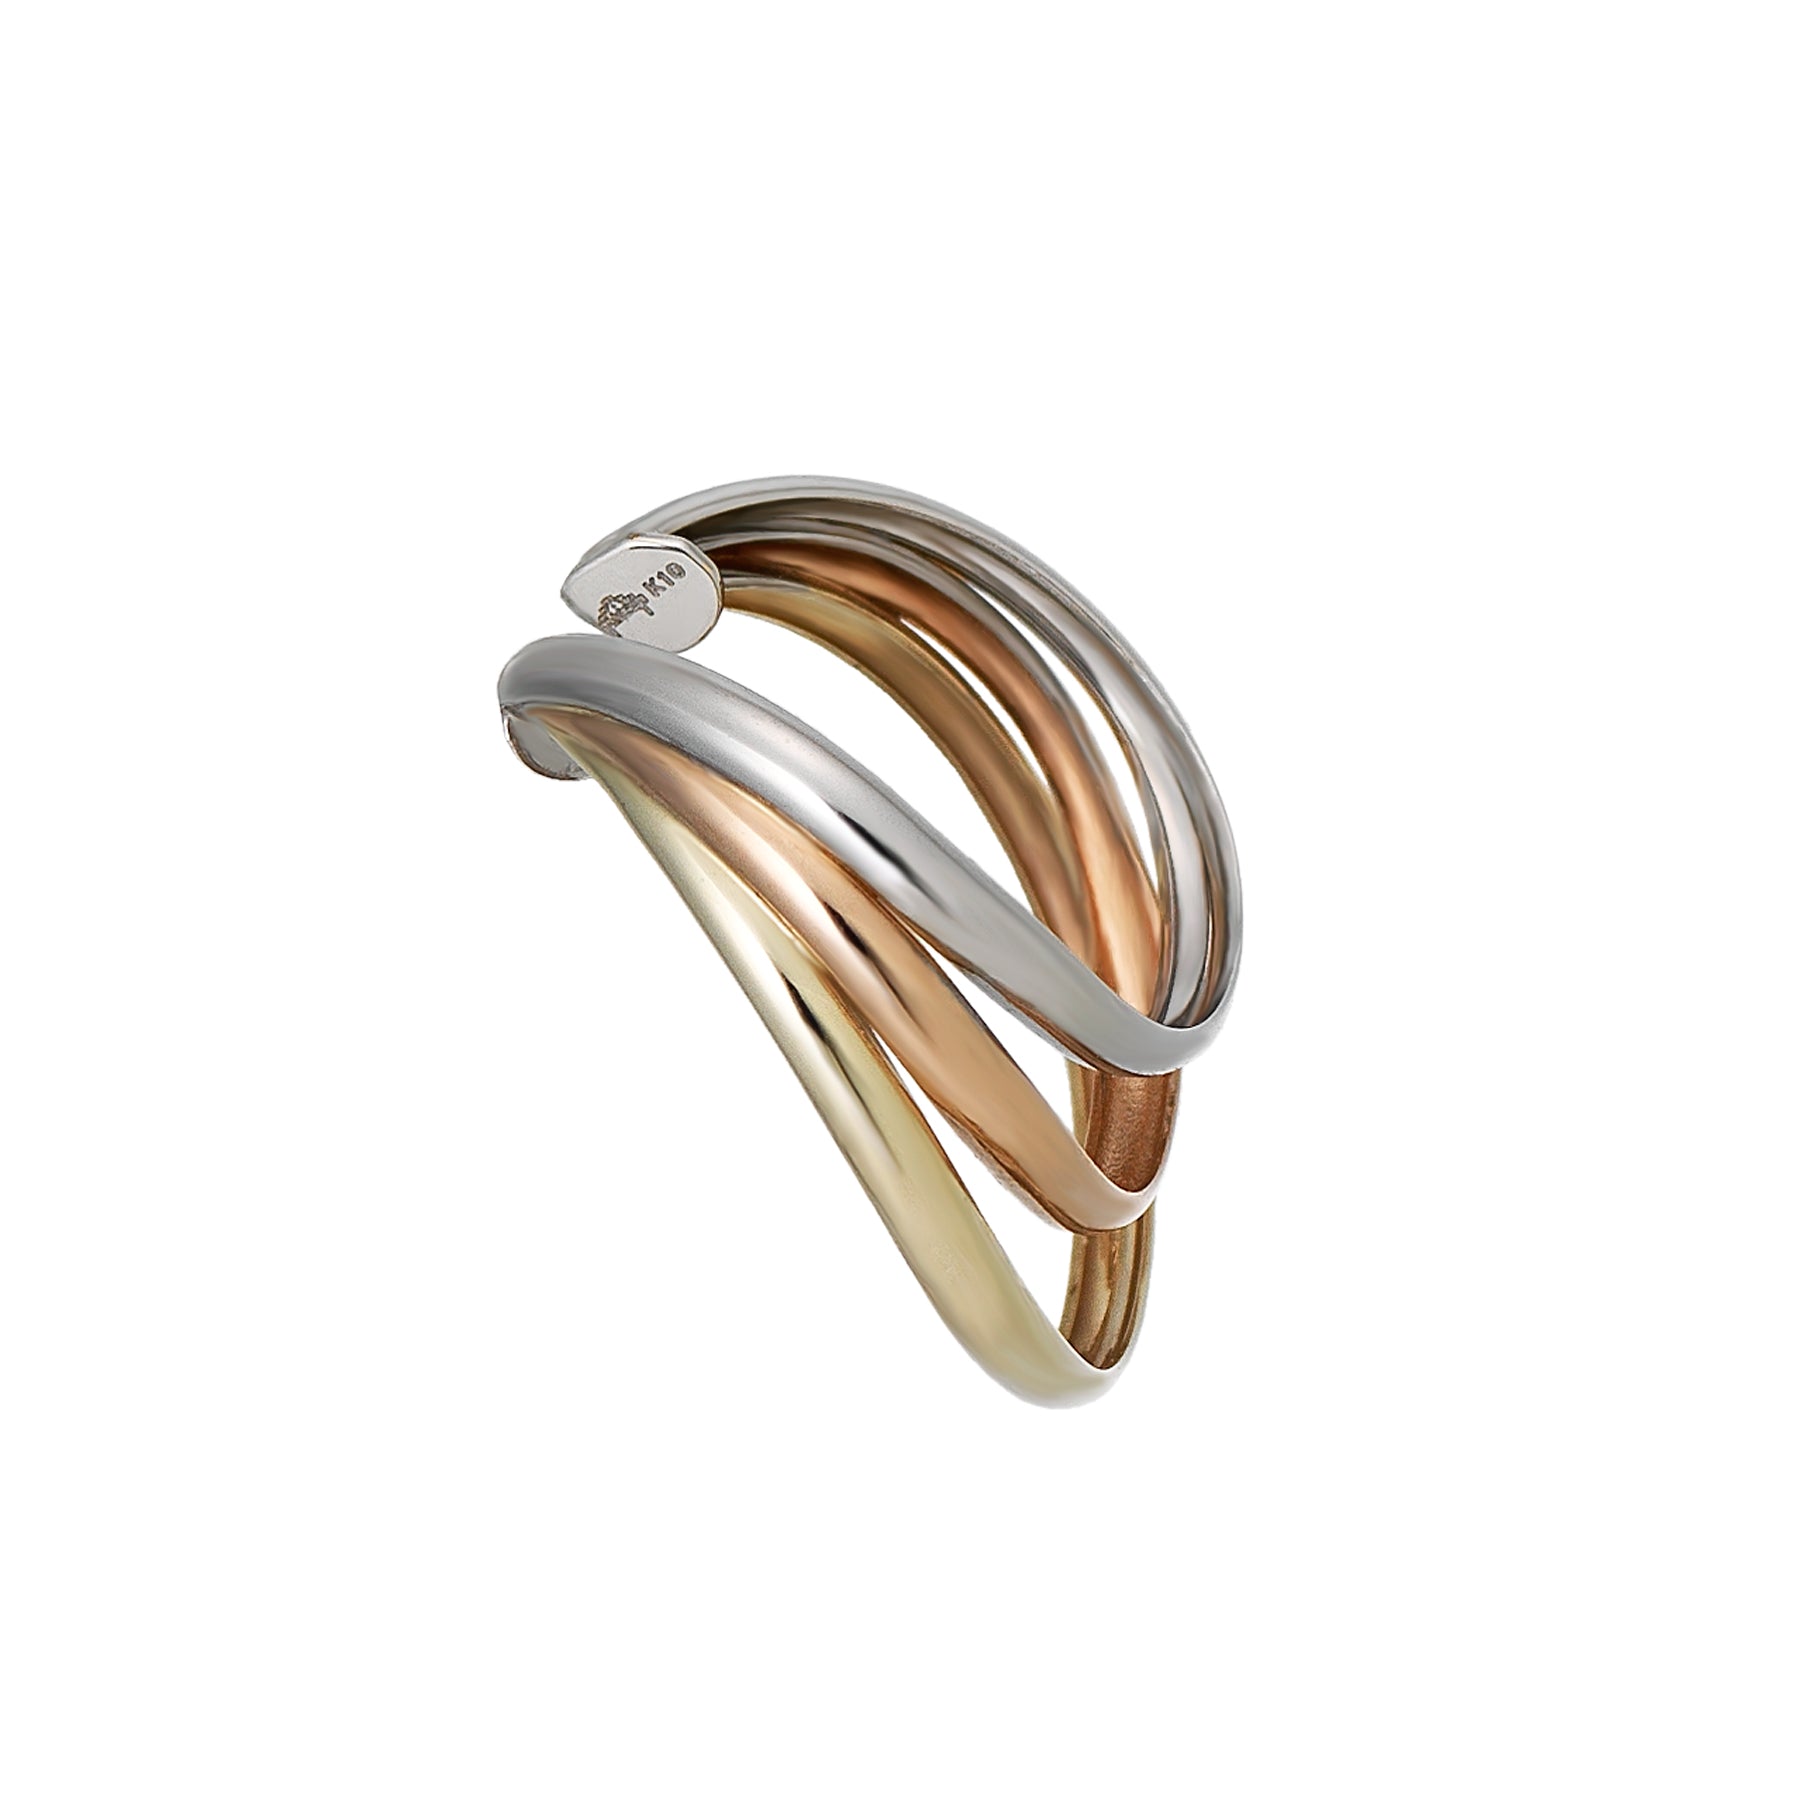 10K Gold 3-Color Ear Cuff (White Gold / Yellow Gold / Rose Gold) - Product Image